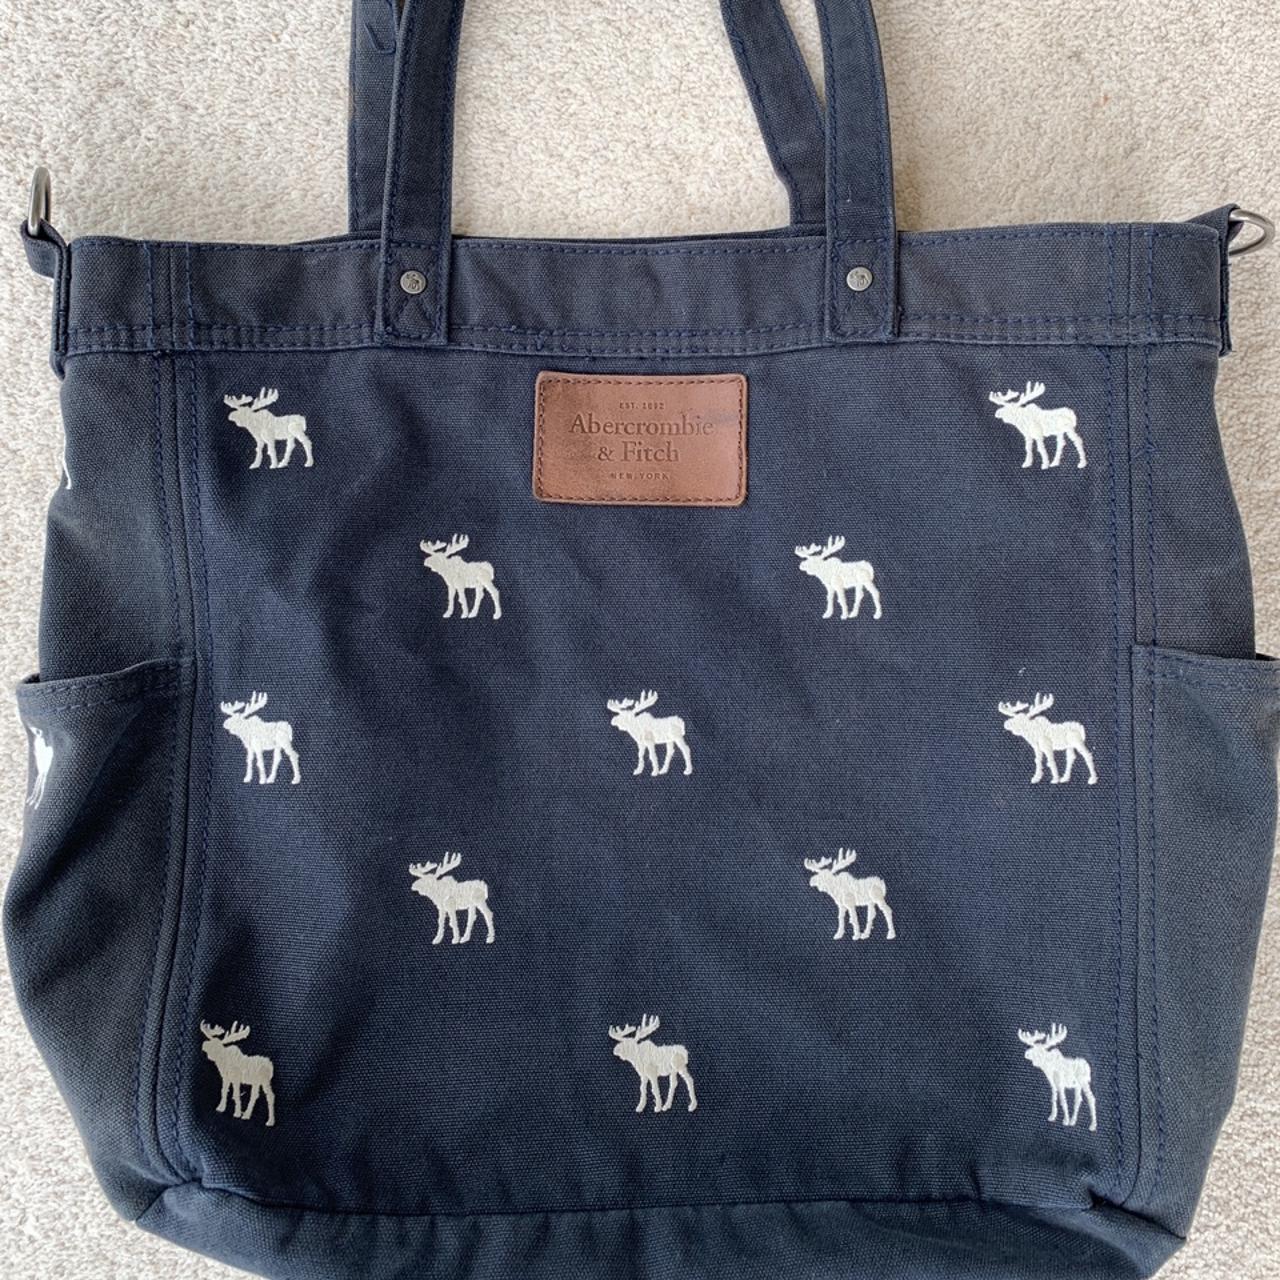 Abercrombie & Fitch | Bags | Abercrombie And Fitch 200s Tote Bag | Poshmark